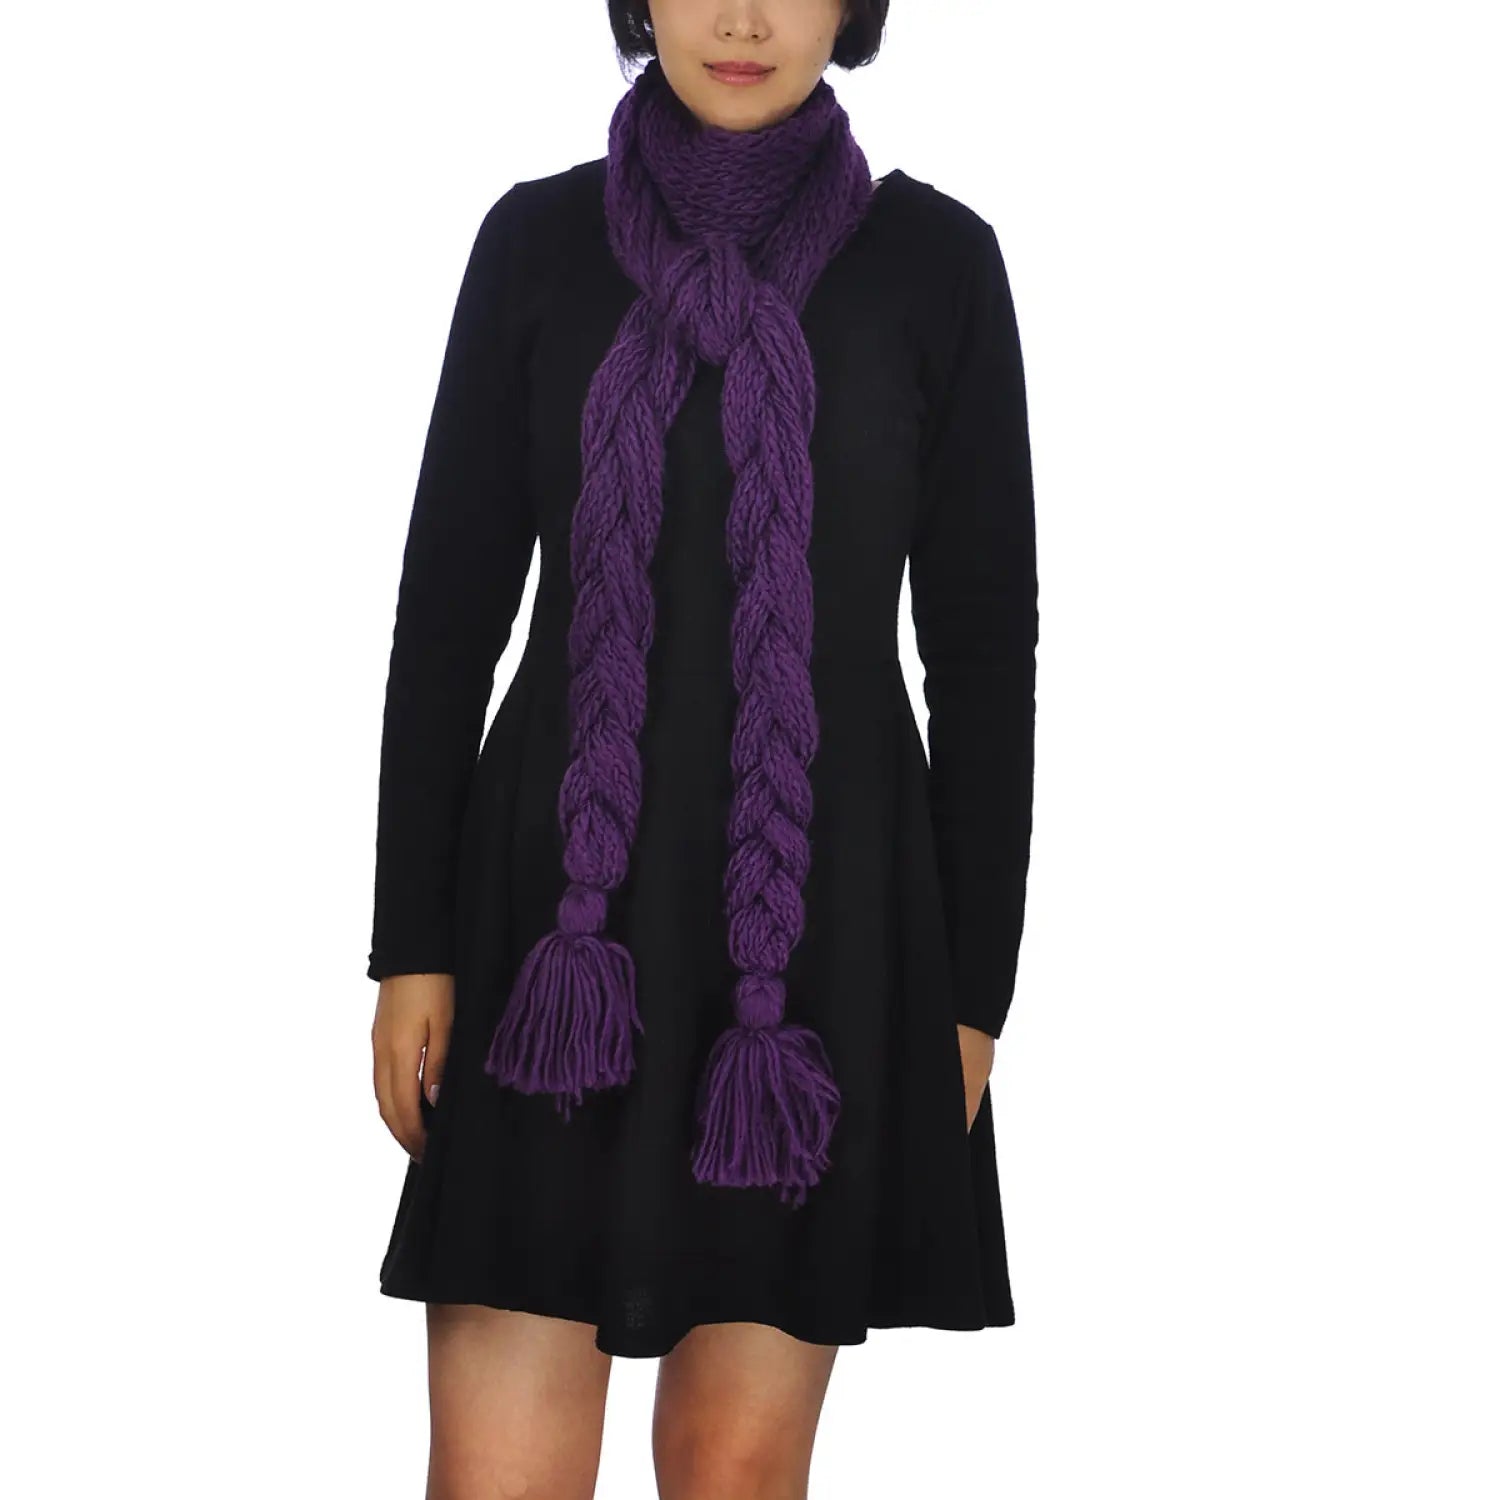 Woman in oversized long plait knitted scarf - Autumn Winter fashion.